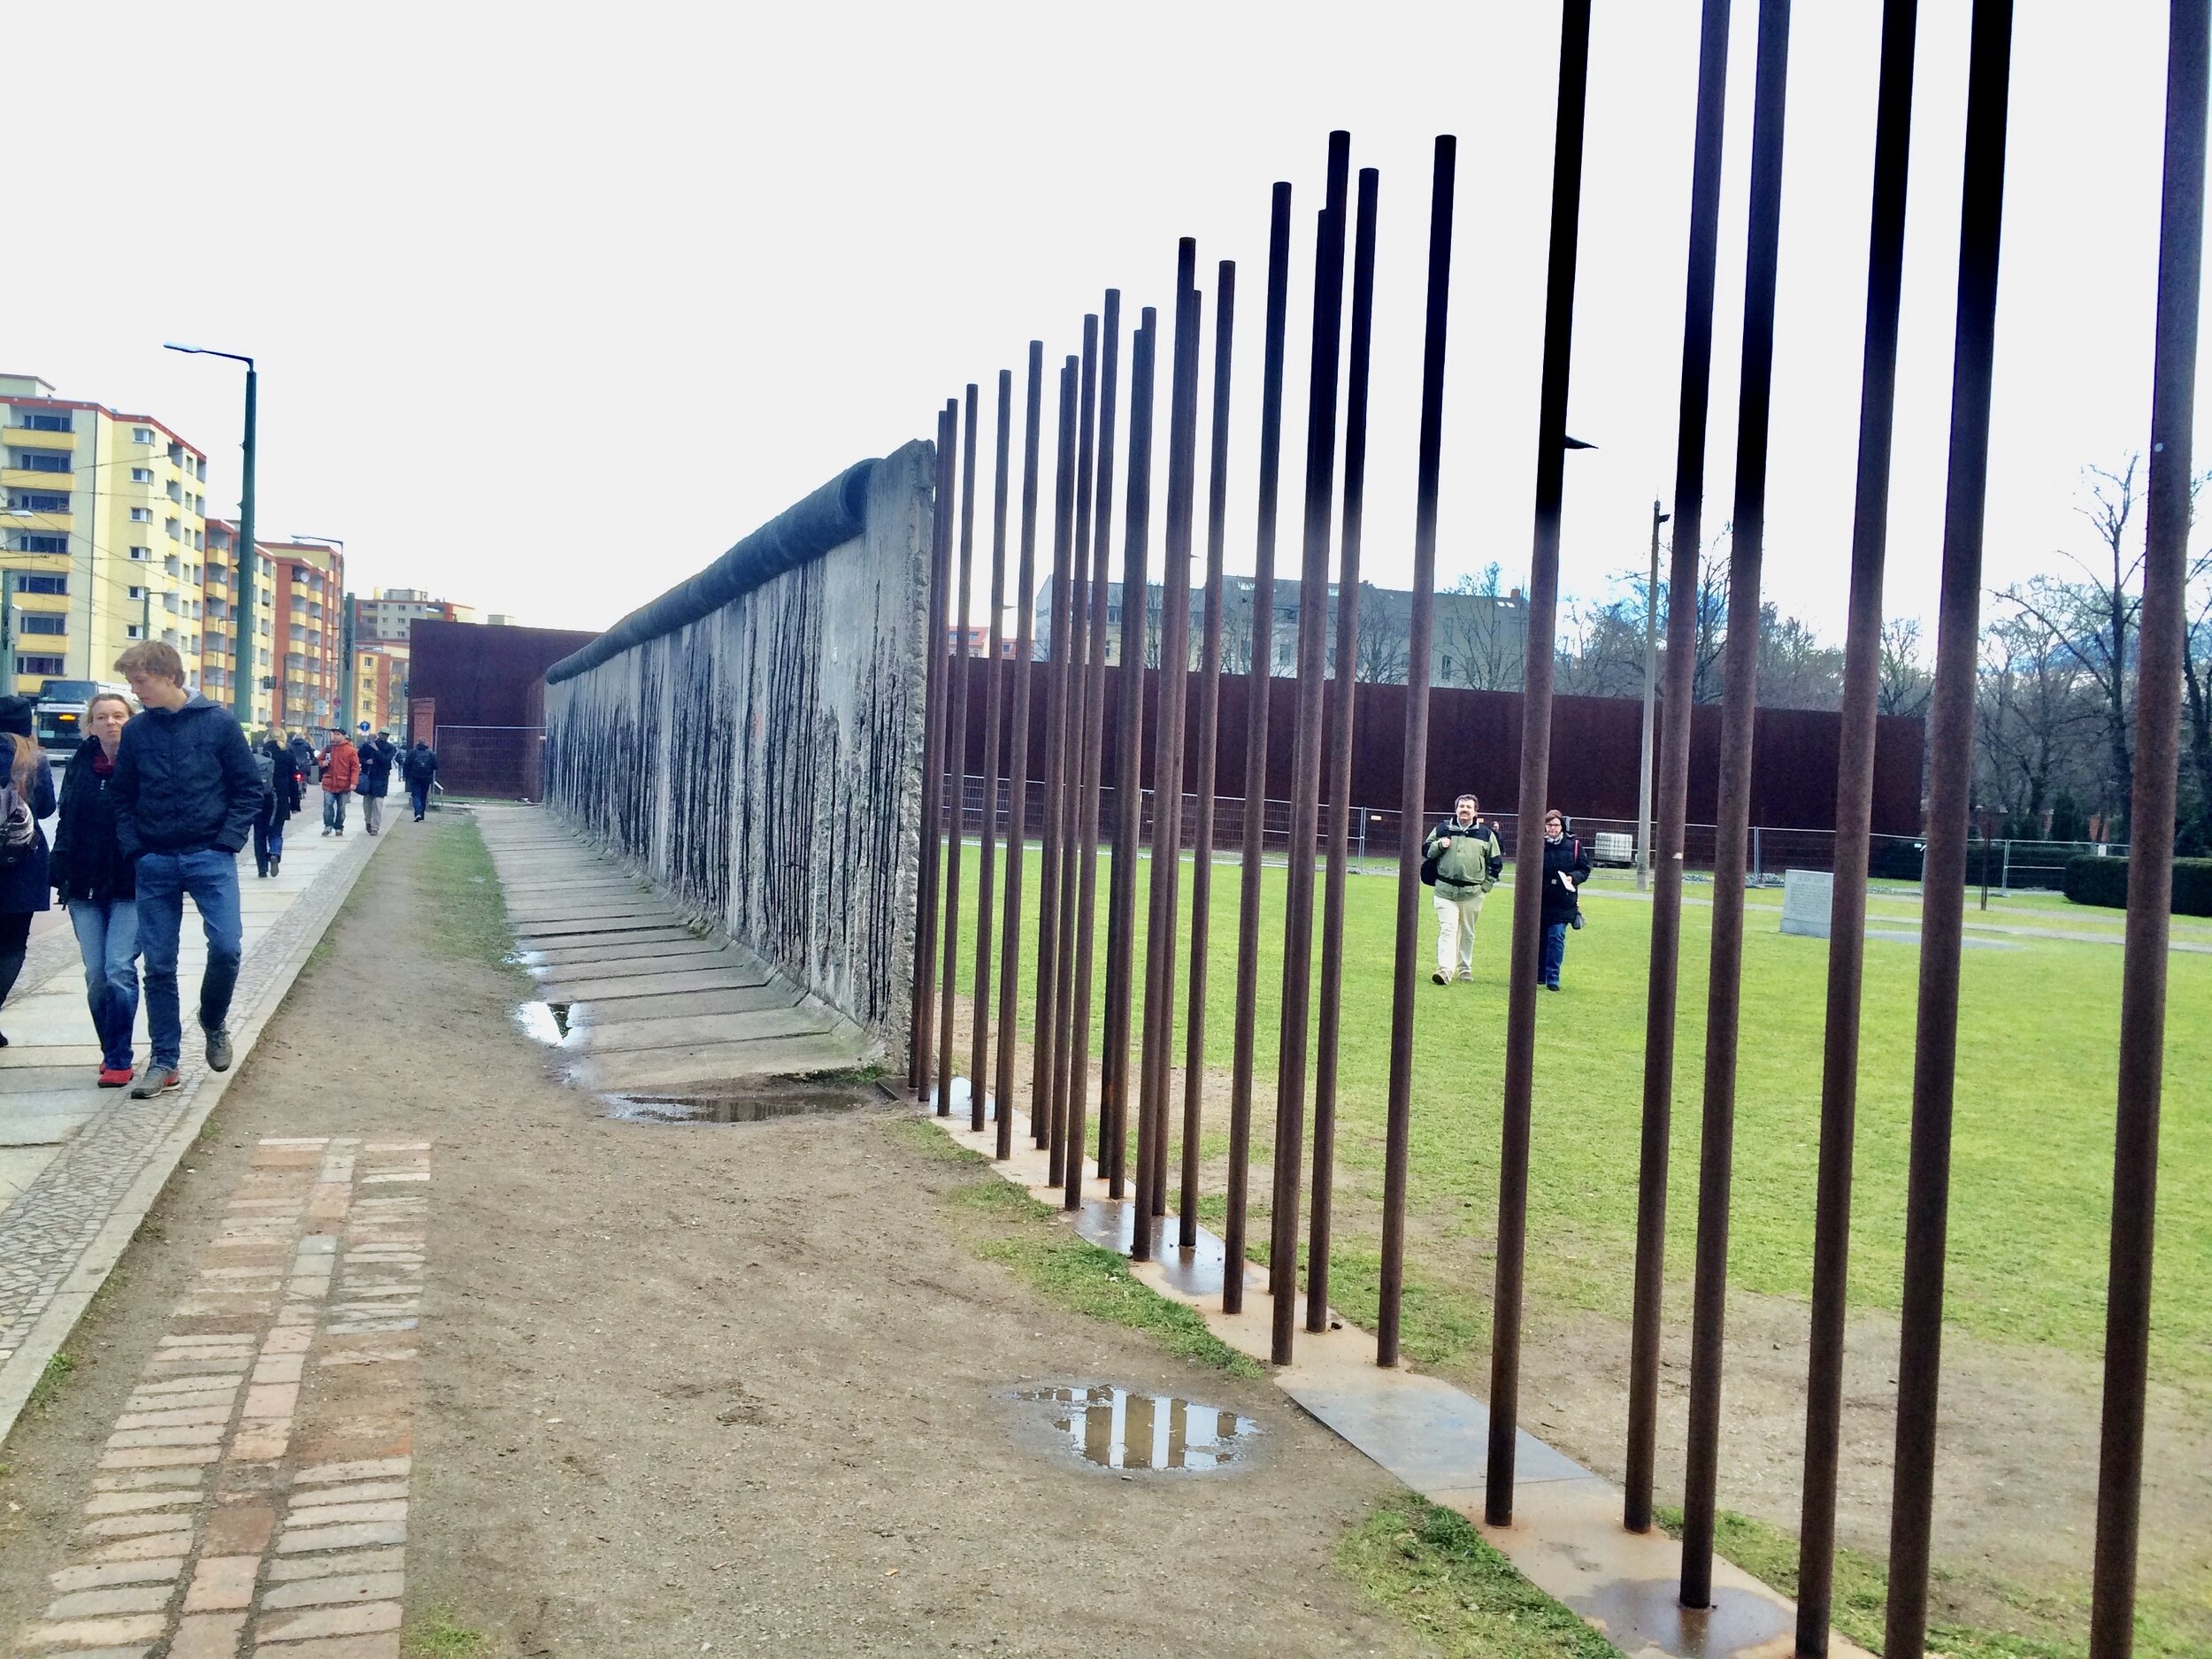 What's left of the Berlin Wall?